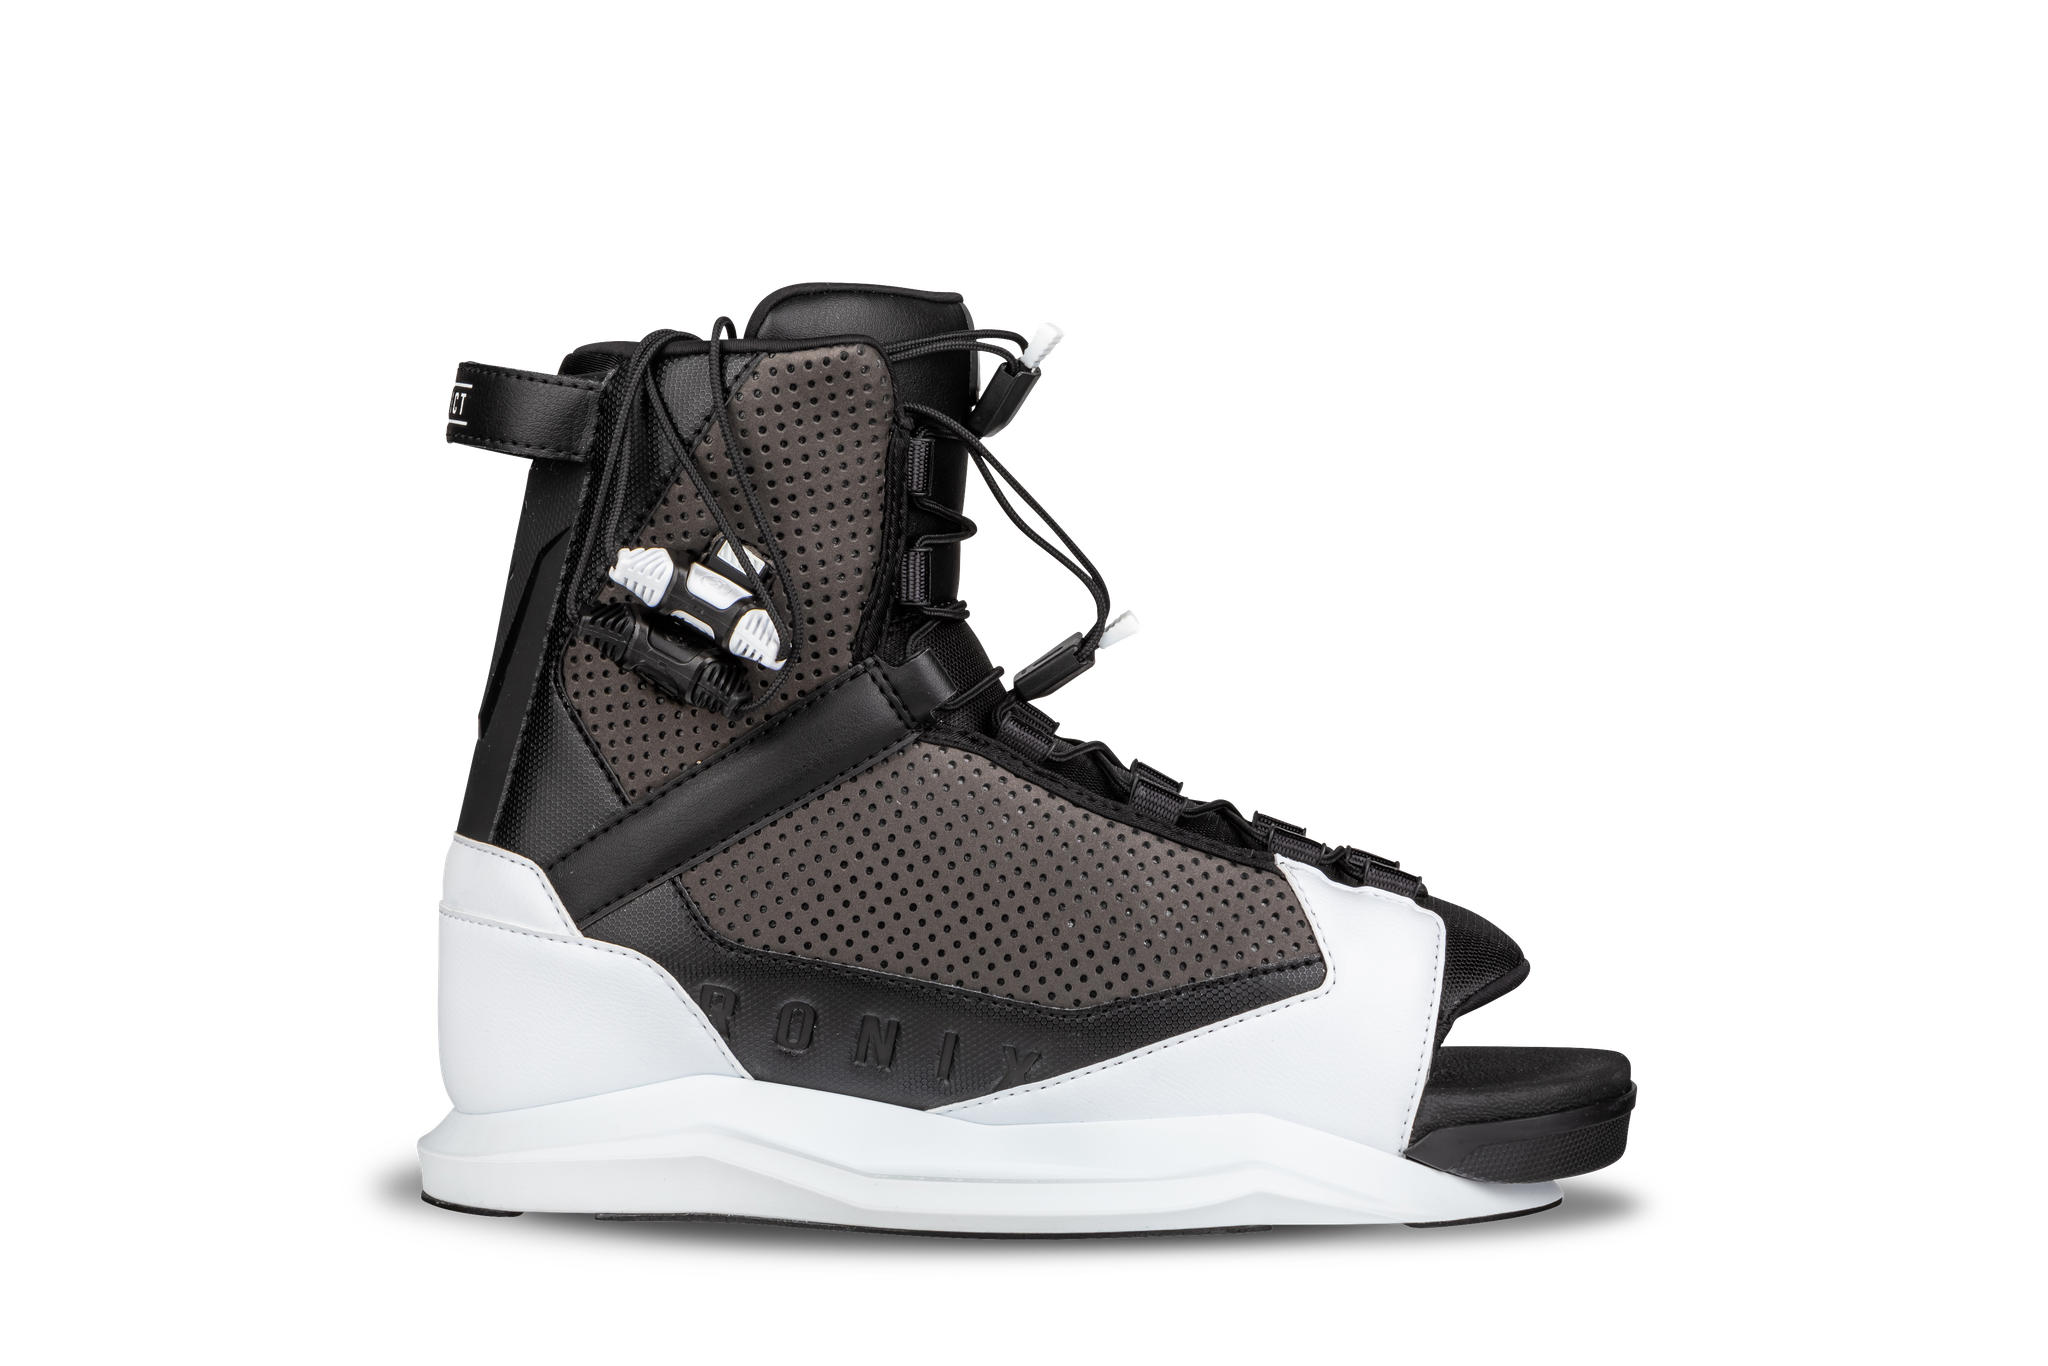 A pair of Ronix 2024 District Bindings ski boots with SIZE ADAPTABLE feature, on a black background.